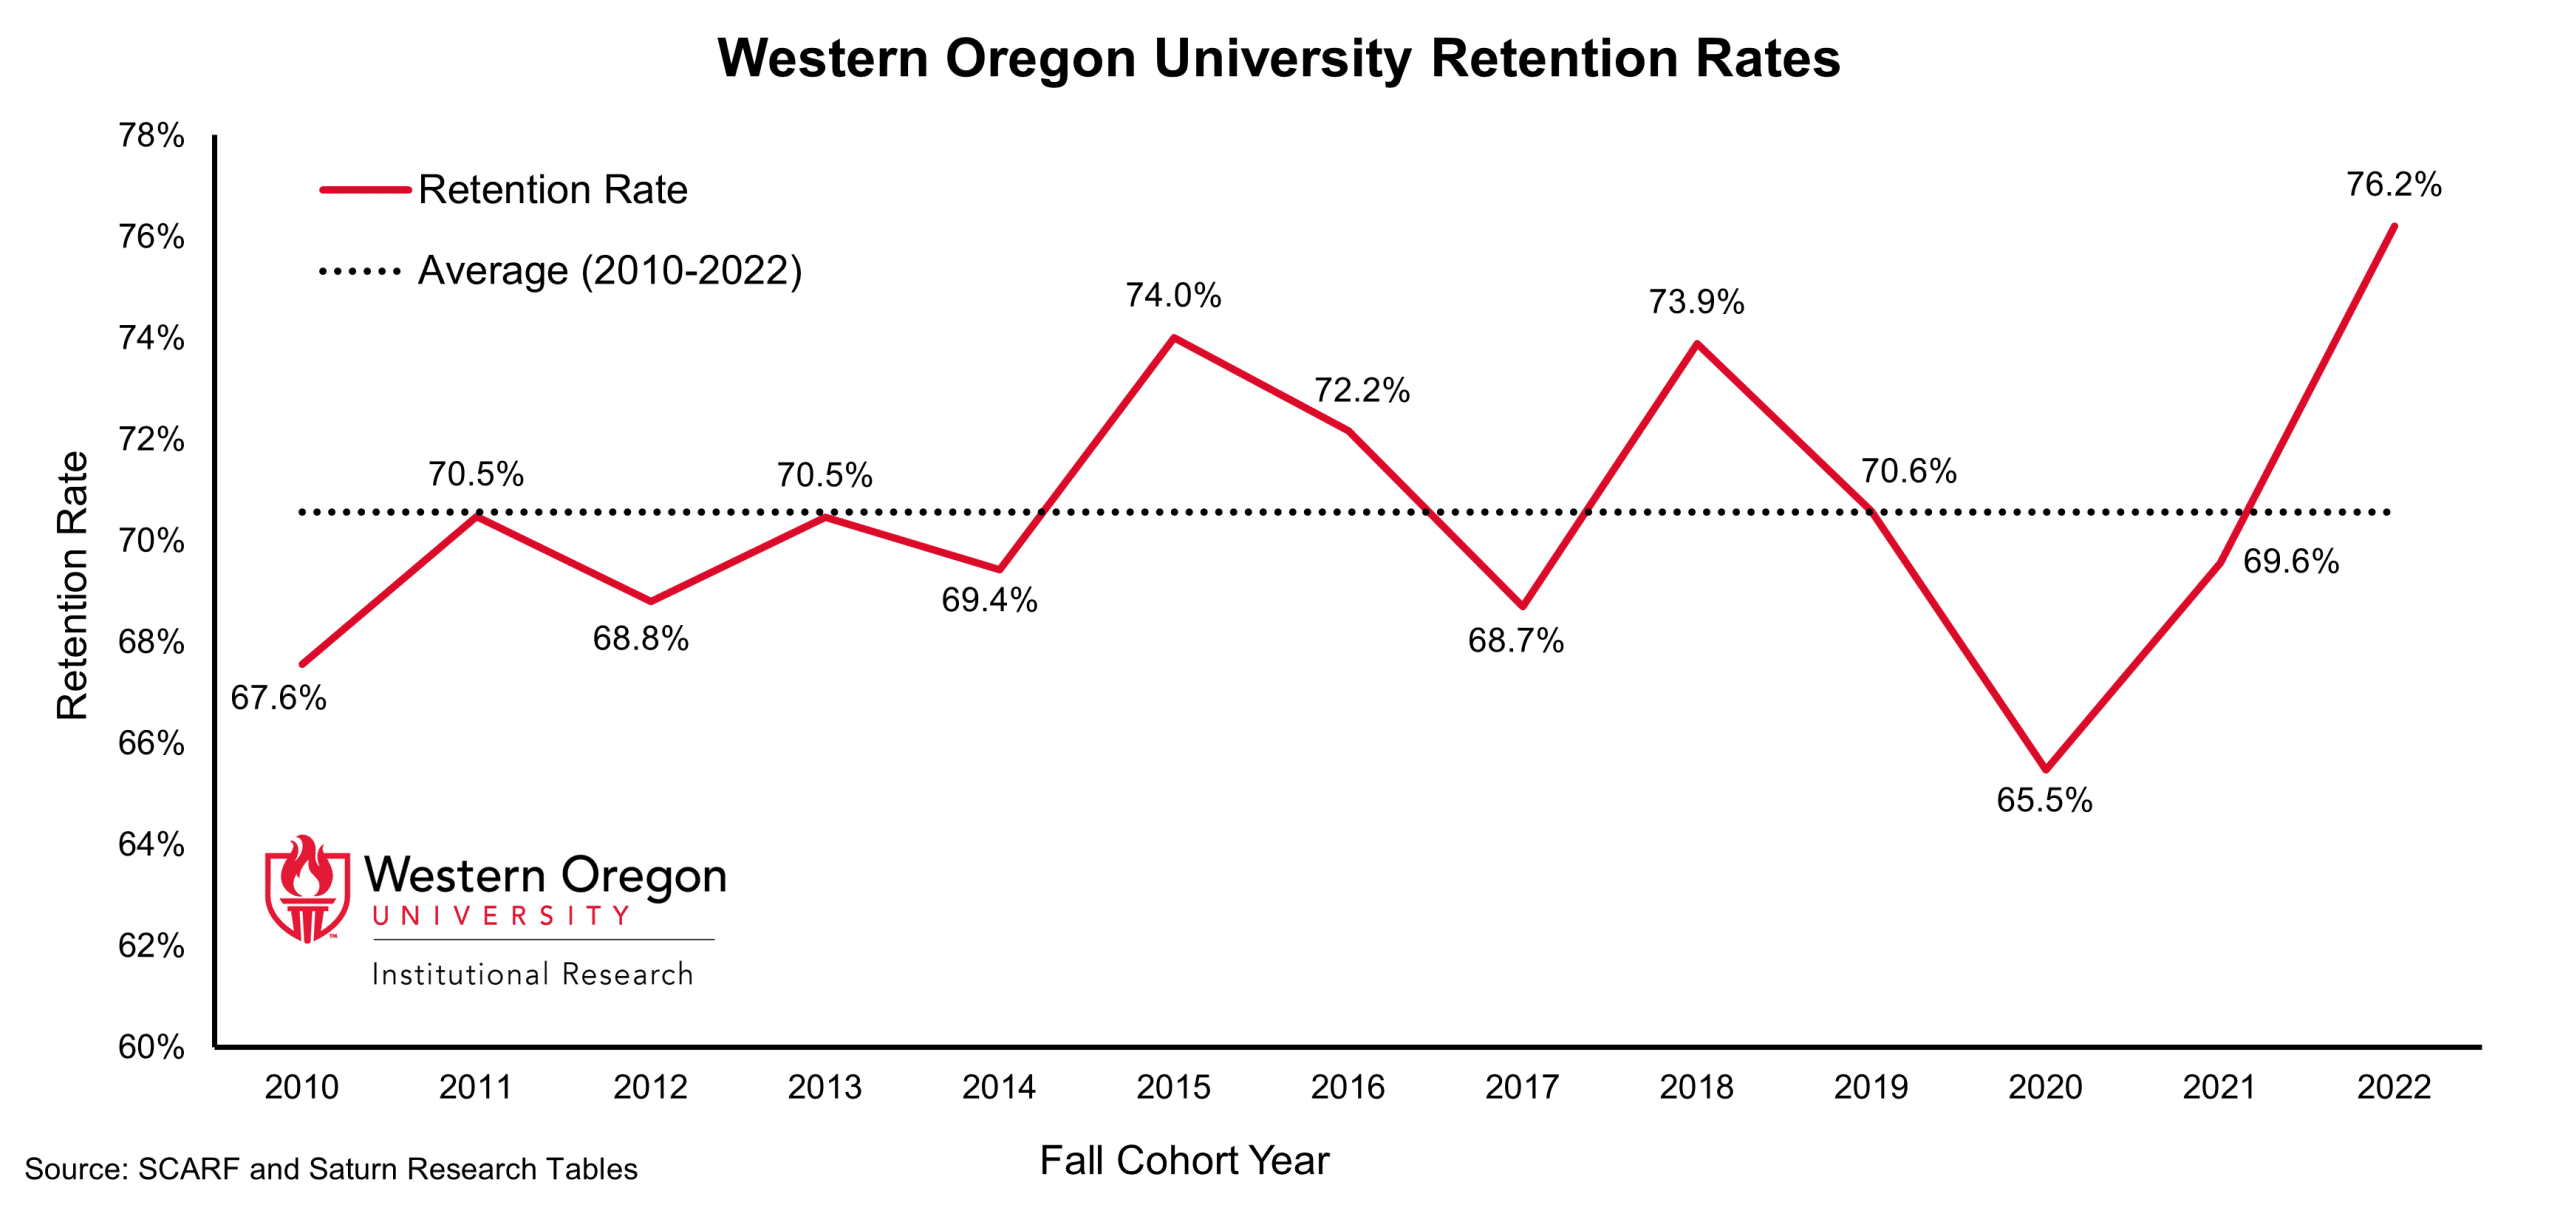 Retention rate for first-time full-time students since 2010